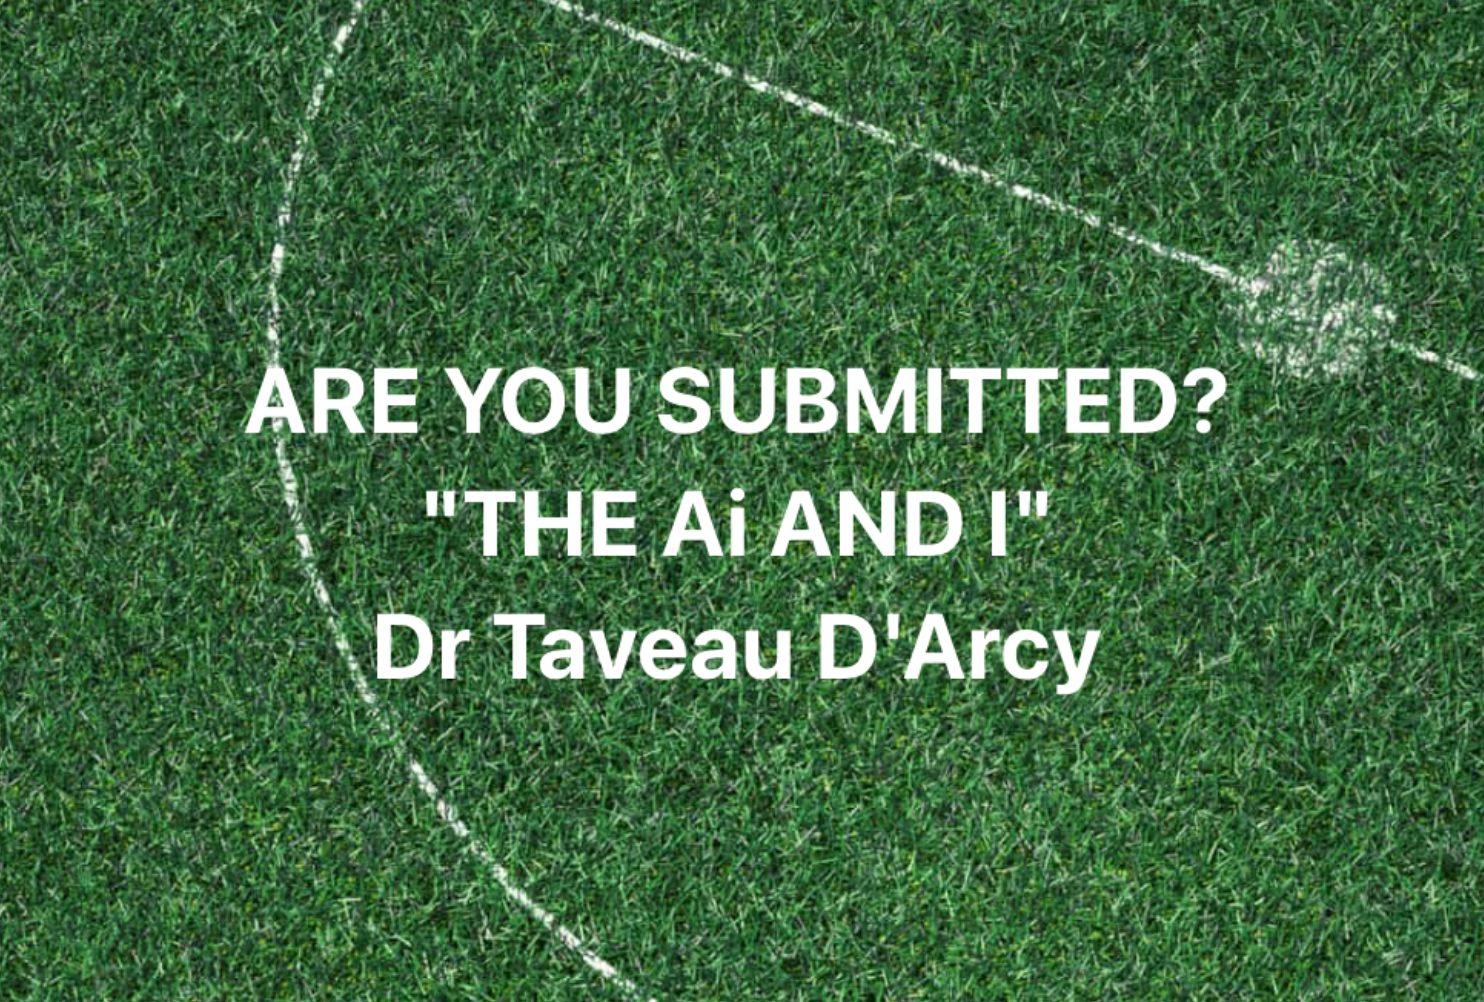 PART 2 (OF 9-10) “THE AI AND I” ARE YOU SUBMITTED? MINISTER JESUS & EPH 5:21